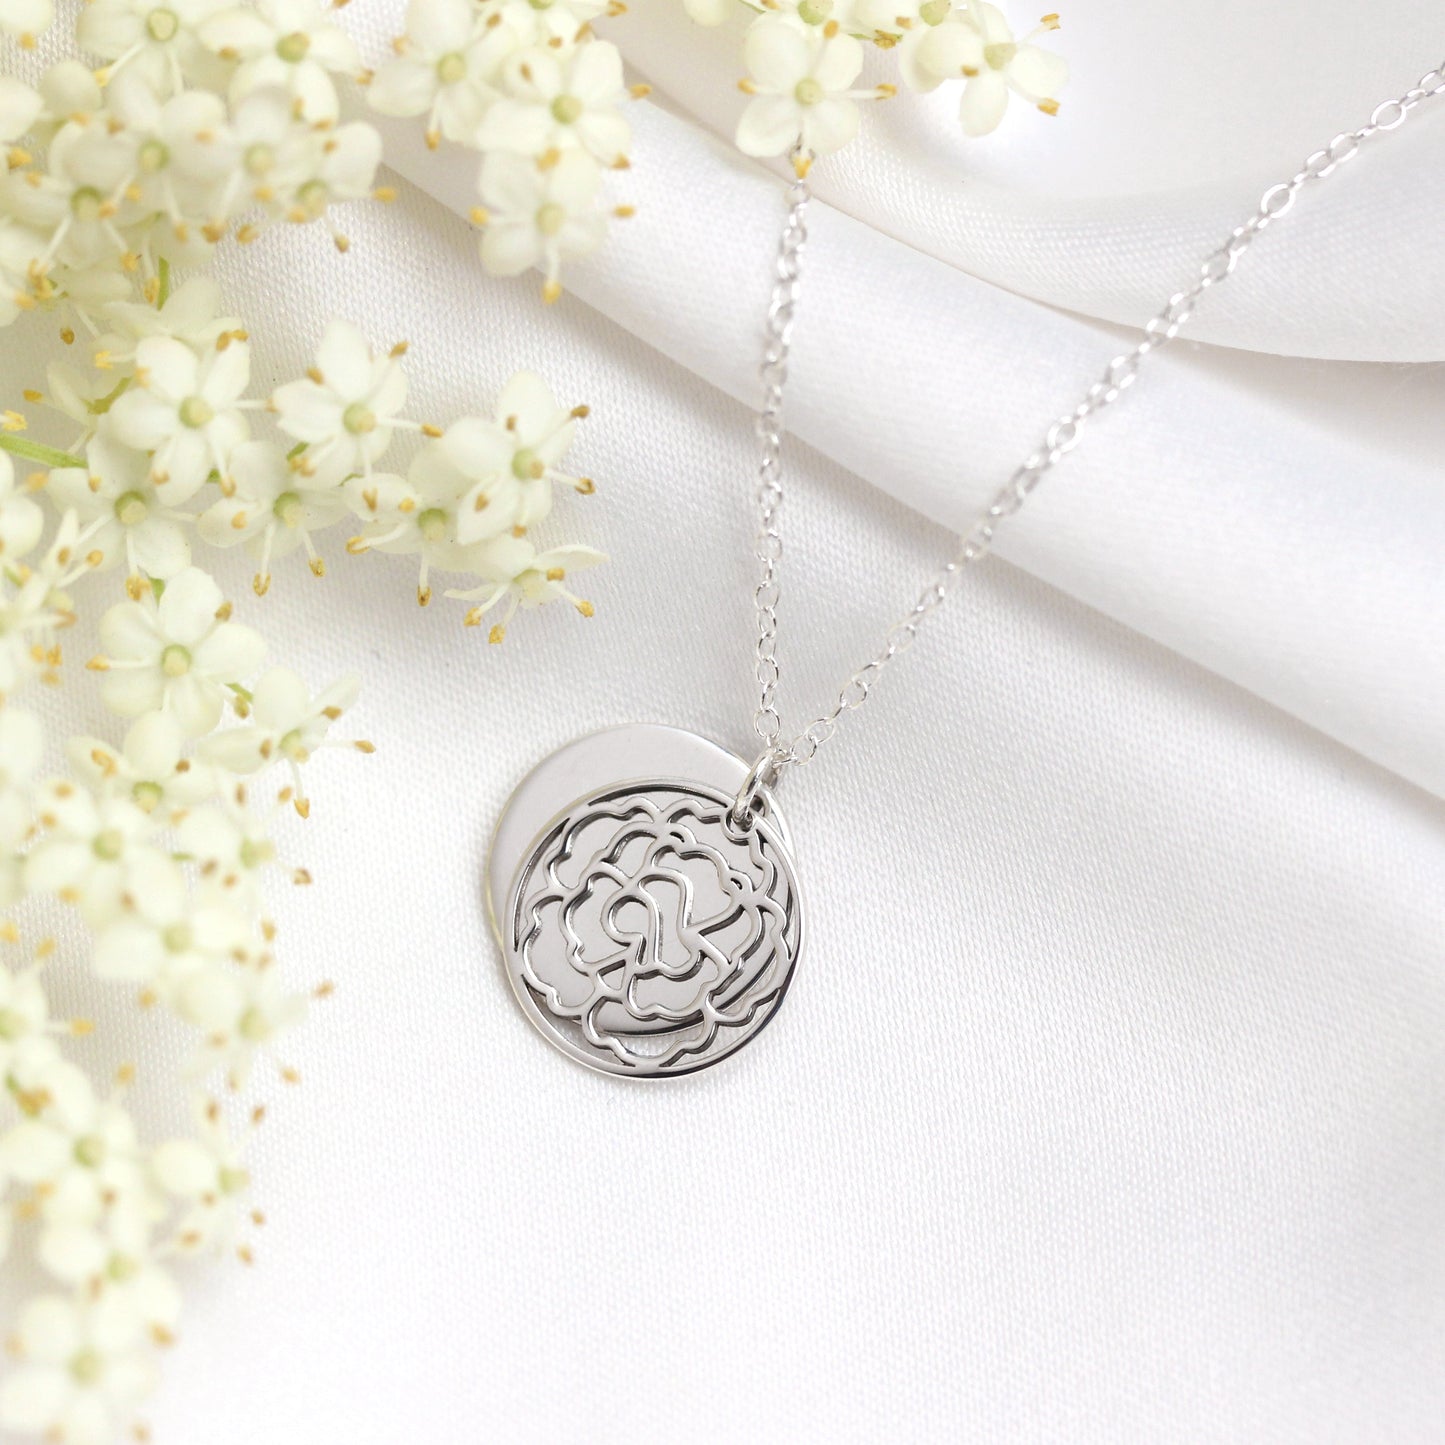 Sterling Silver January Carnation Birth Flower & 13mm Engravable Tag Necklace 14 - 22 Inches